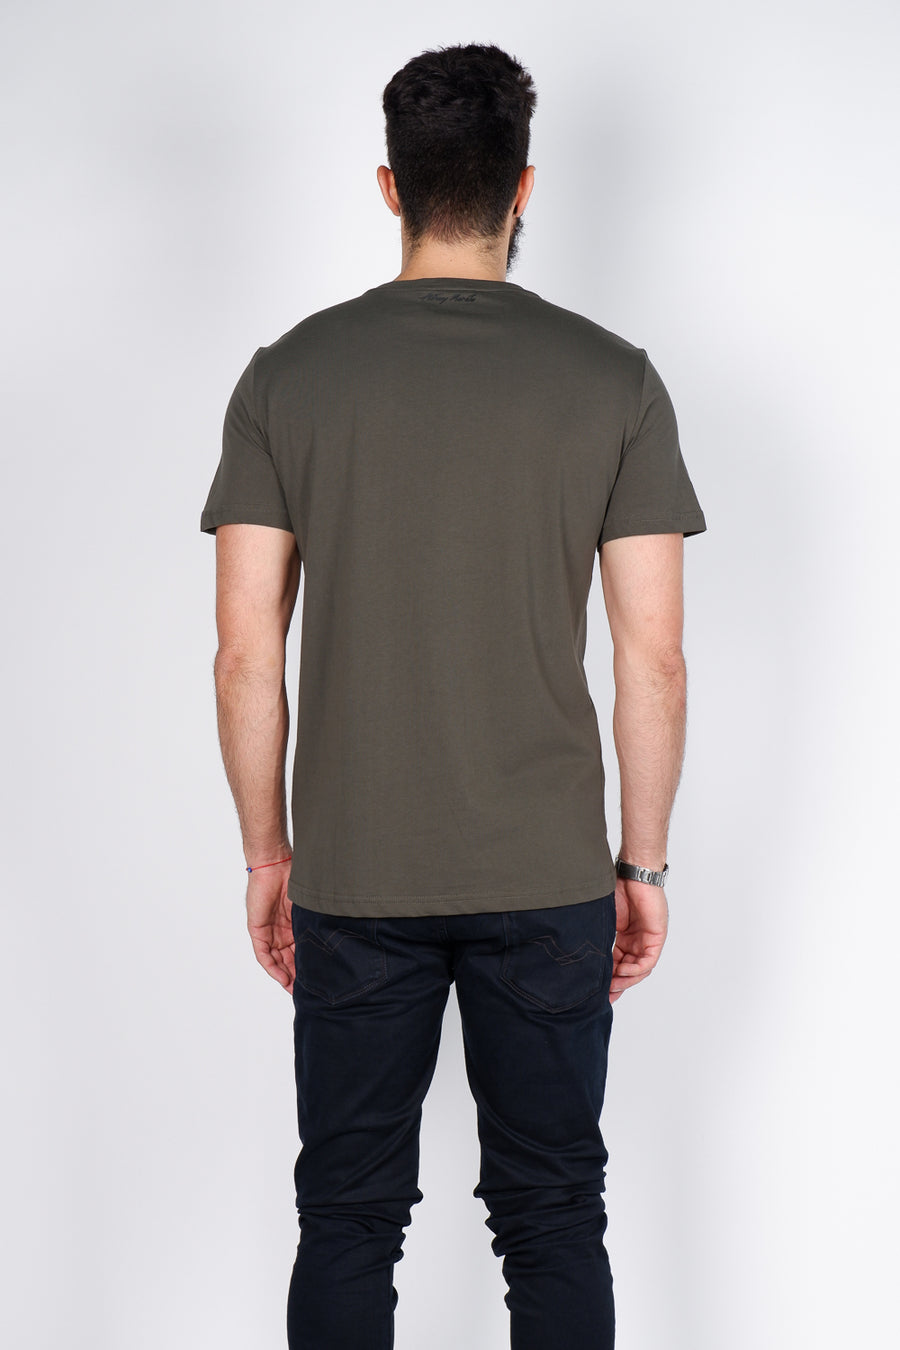 Buy the Antony Morato Skull Print Slim Fit T-Shirt Olive at Intro. Spend £50 for free UK delivery. Official stockists. We ship worldwide.